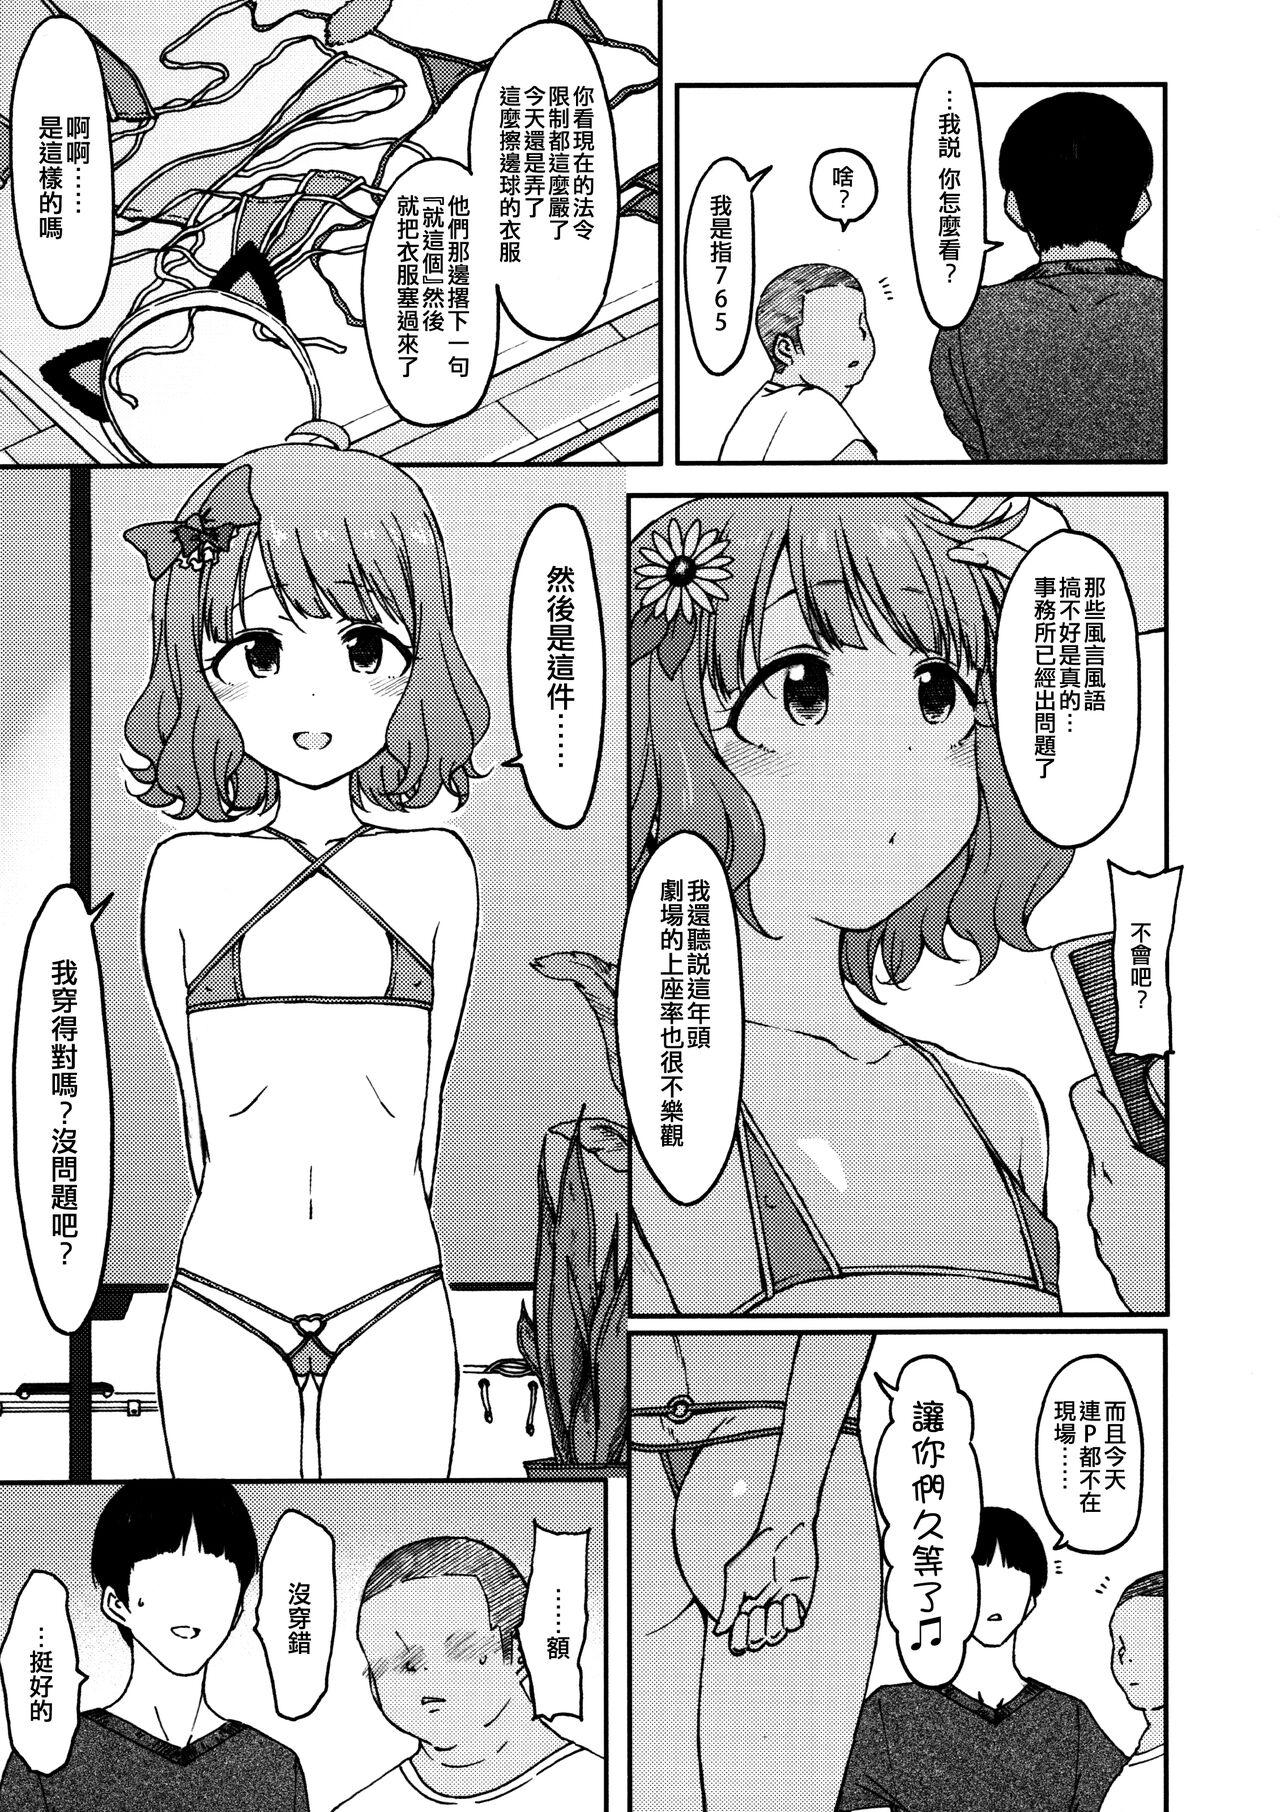 Female Candy Wrapper - The idolmaster Small - Page 6